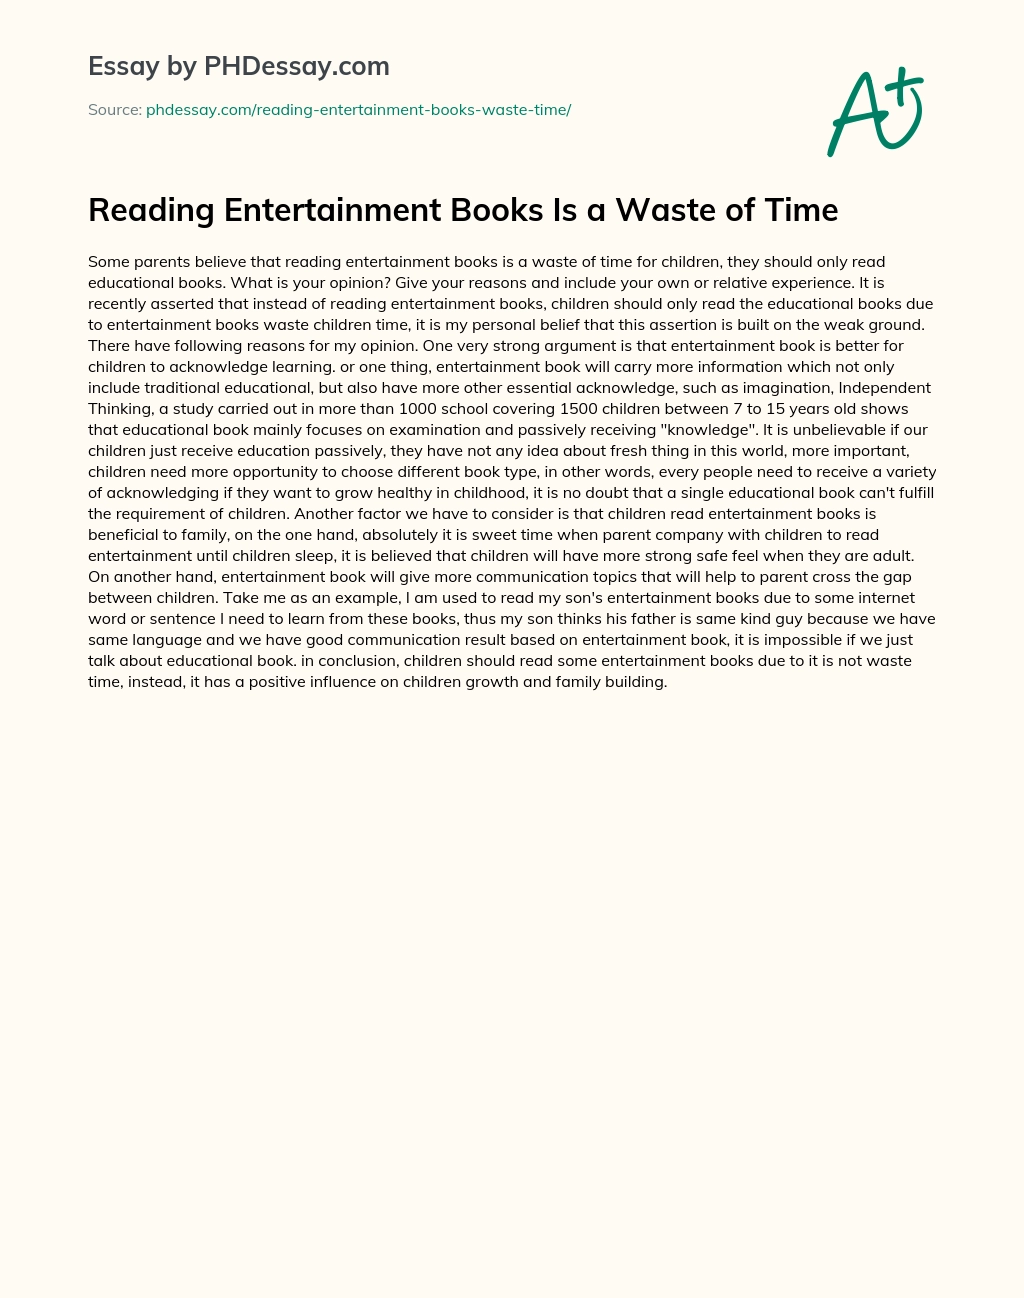 Reading Entertainment Books Is a Waste of Time essay